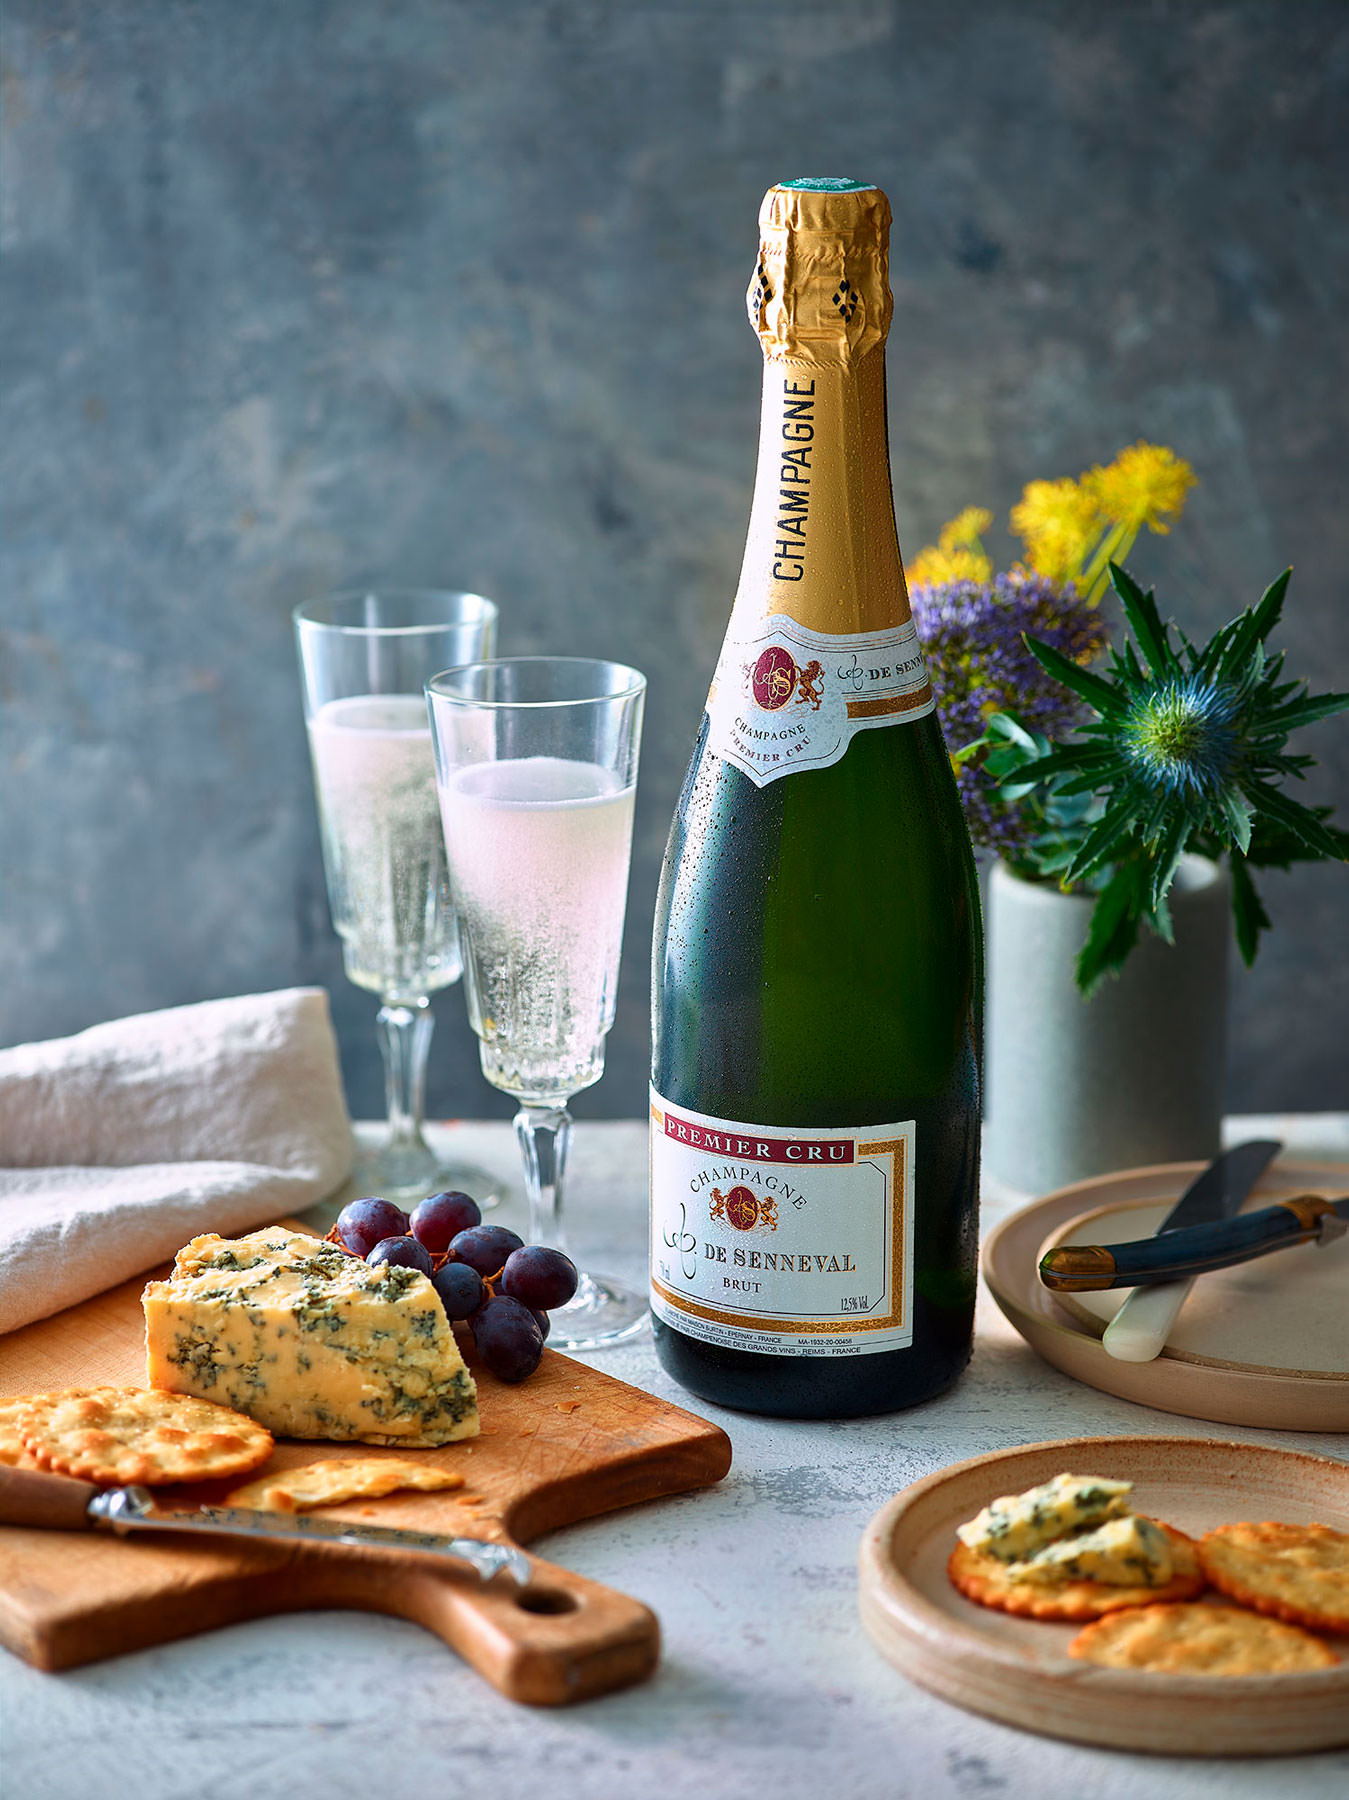 Champagne De Senneval Brut Bottle with two glasses and a cheese board  London Food & Drinks Photographer